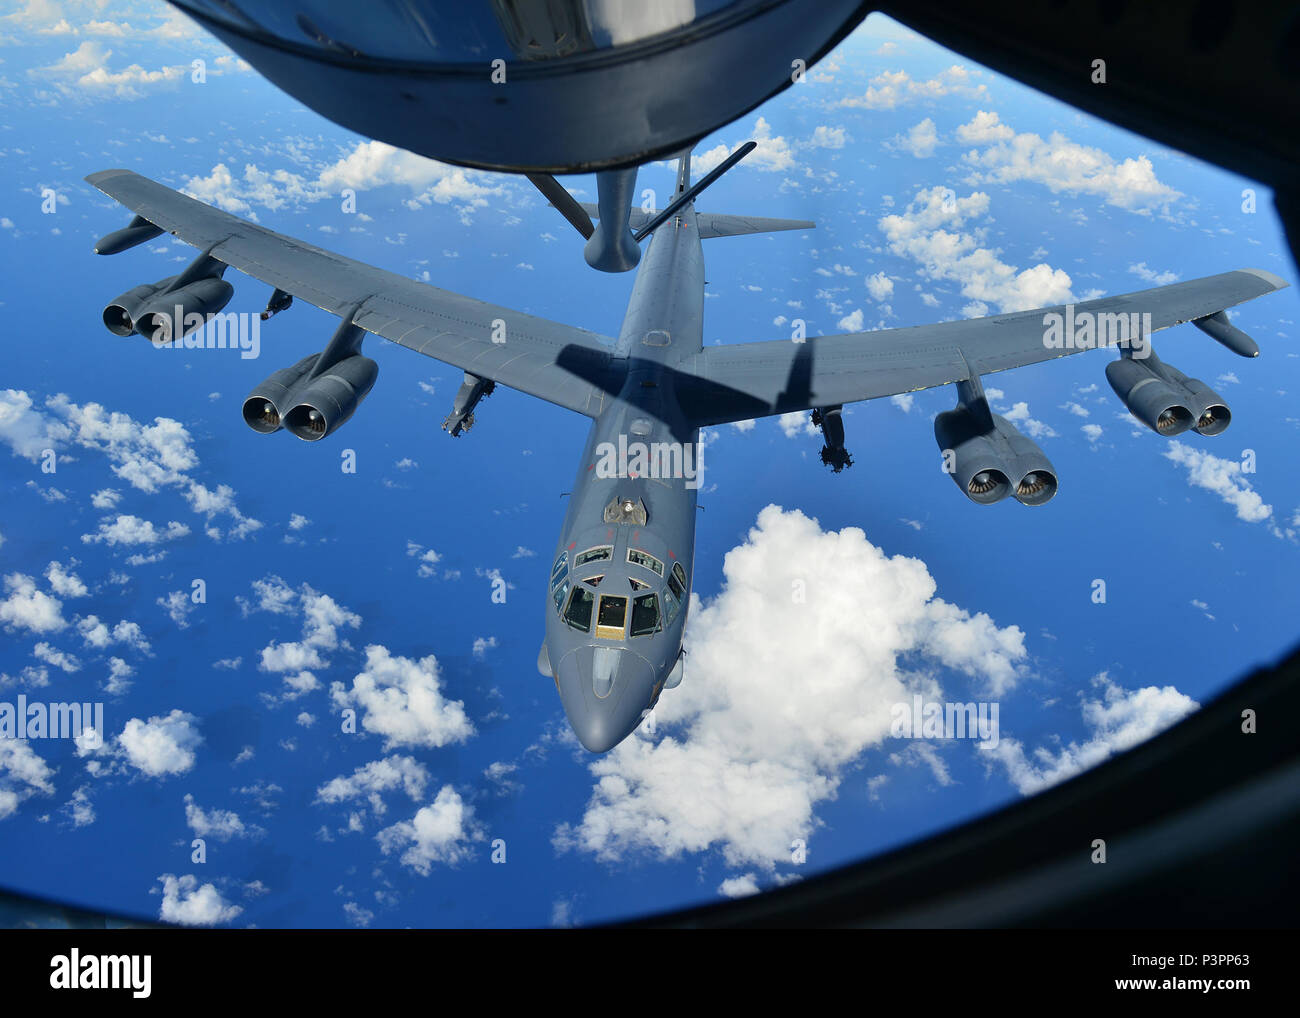 A B-52H Stratofortress from the 69th Bomb Squadron, Minot Air Force Base, N.D., prepares to receive fuel from a KC-135 Stratotanker over the Pacific Ocean during an international sinking exercise for Rim of the Pacific 2016 near Joint Base Pearl Harbor-Hickam, July 14, 2016. Twenty-six nations, more than 40 ships and submarines, more than 200 aircraft, and 25,000 personnel are participating in RIMPAC from June 30 to Aug. 4 in and around the Hawaiian Islands and Southern California. The world's largest international maritime exercise, RIMPAC, provides a unique training opportunity that helps pa Stock Photo